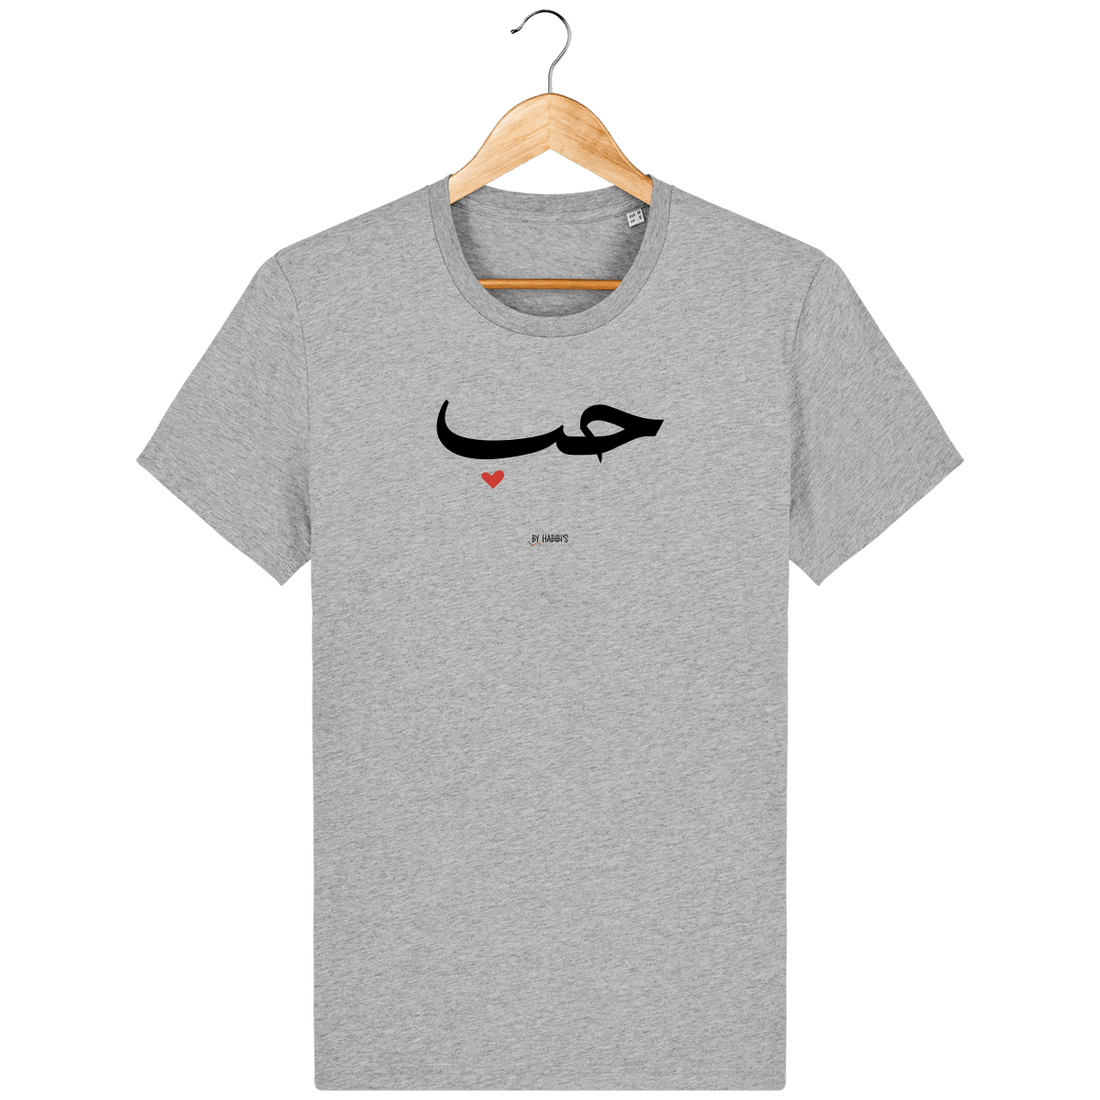 Unisexe>Tee-shirts - T-Shirt Homme <br> Amour